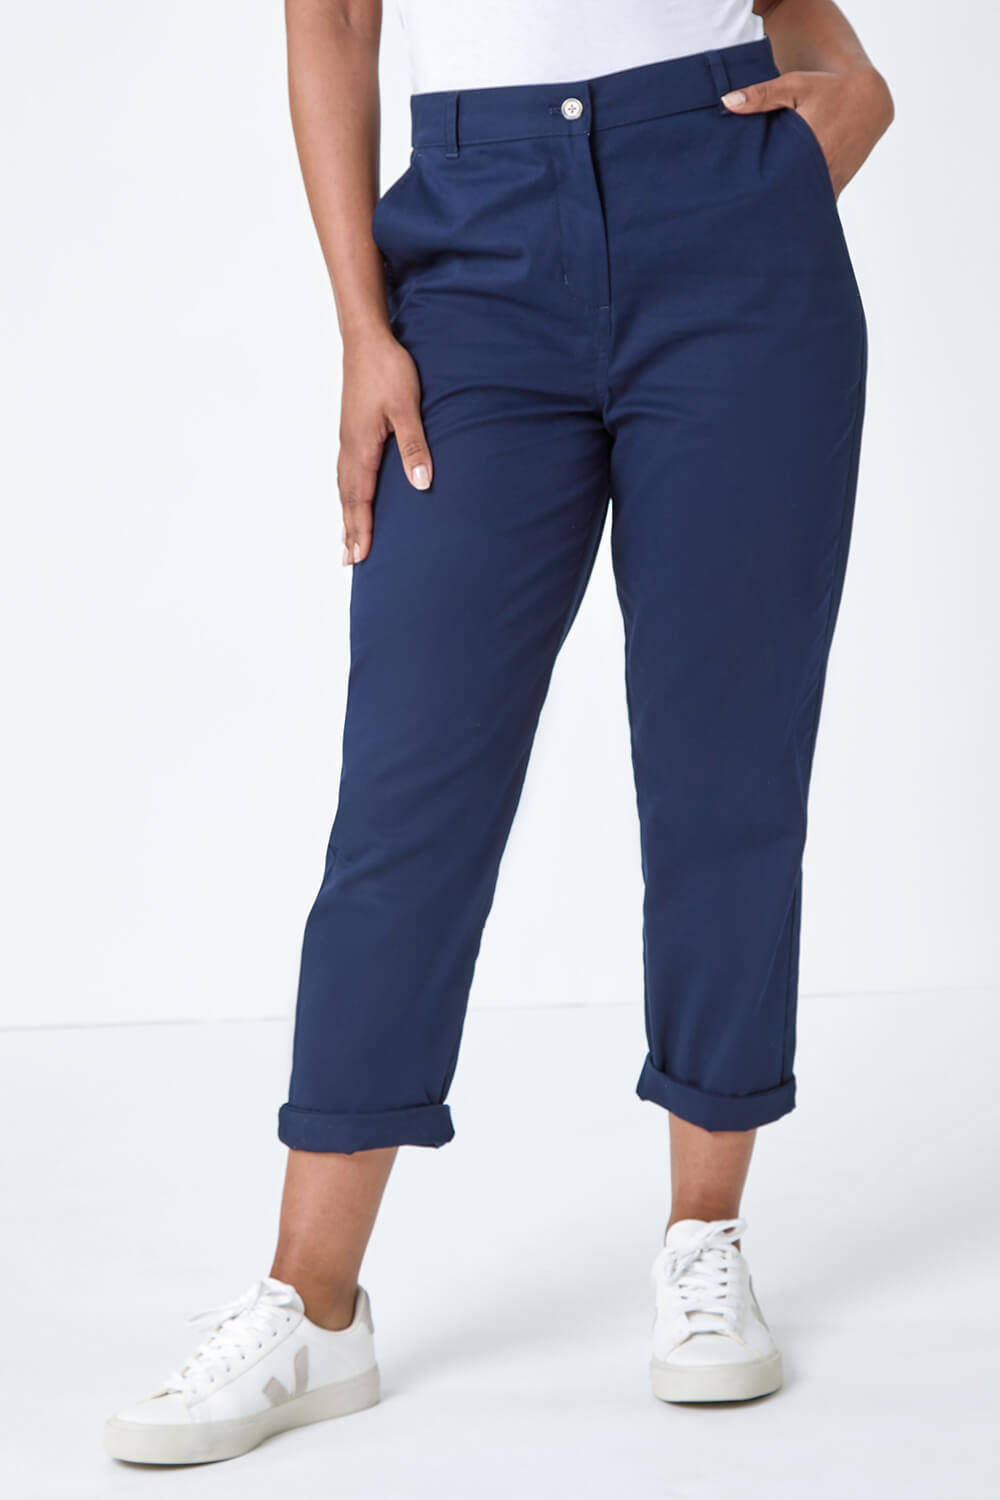 Navy  Petite Cotton Blend Stretch Chino Trousers, Image 4 of 5